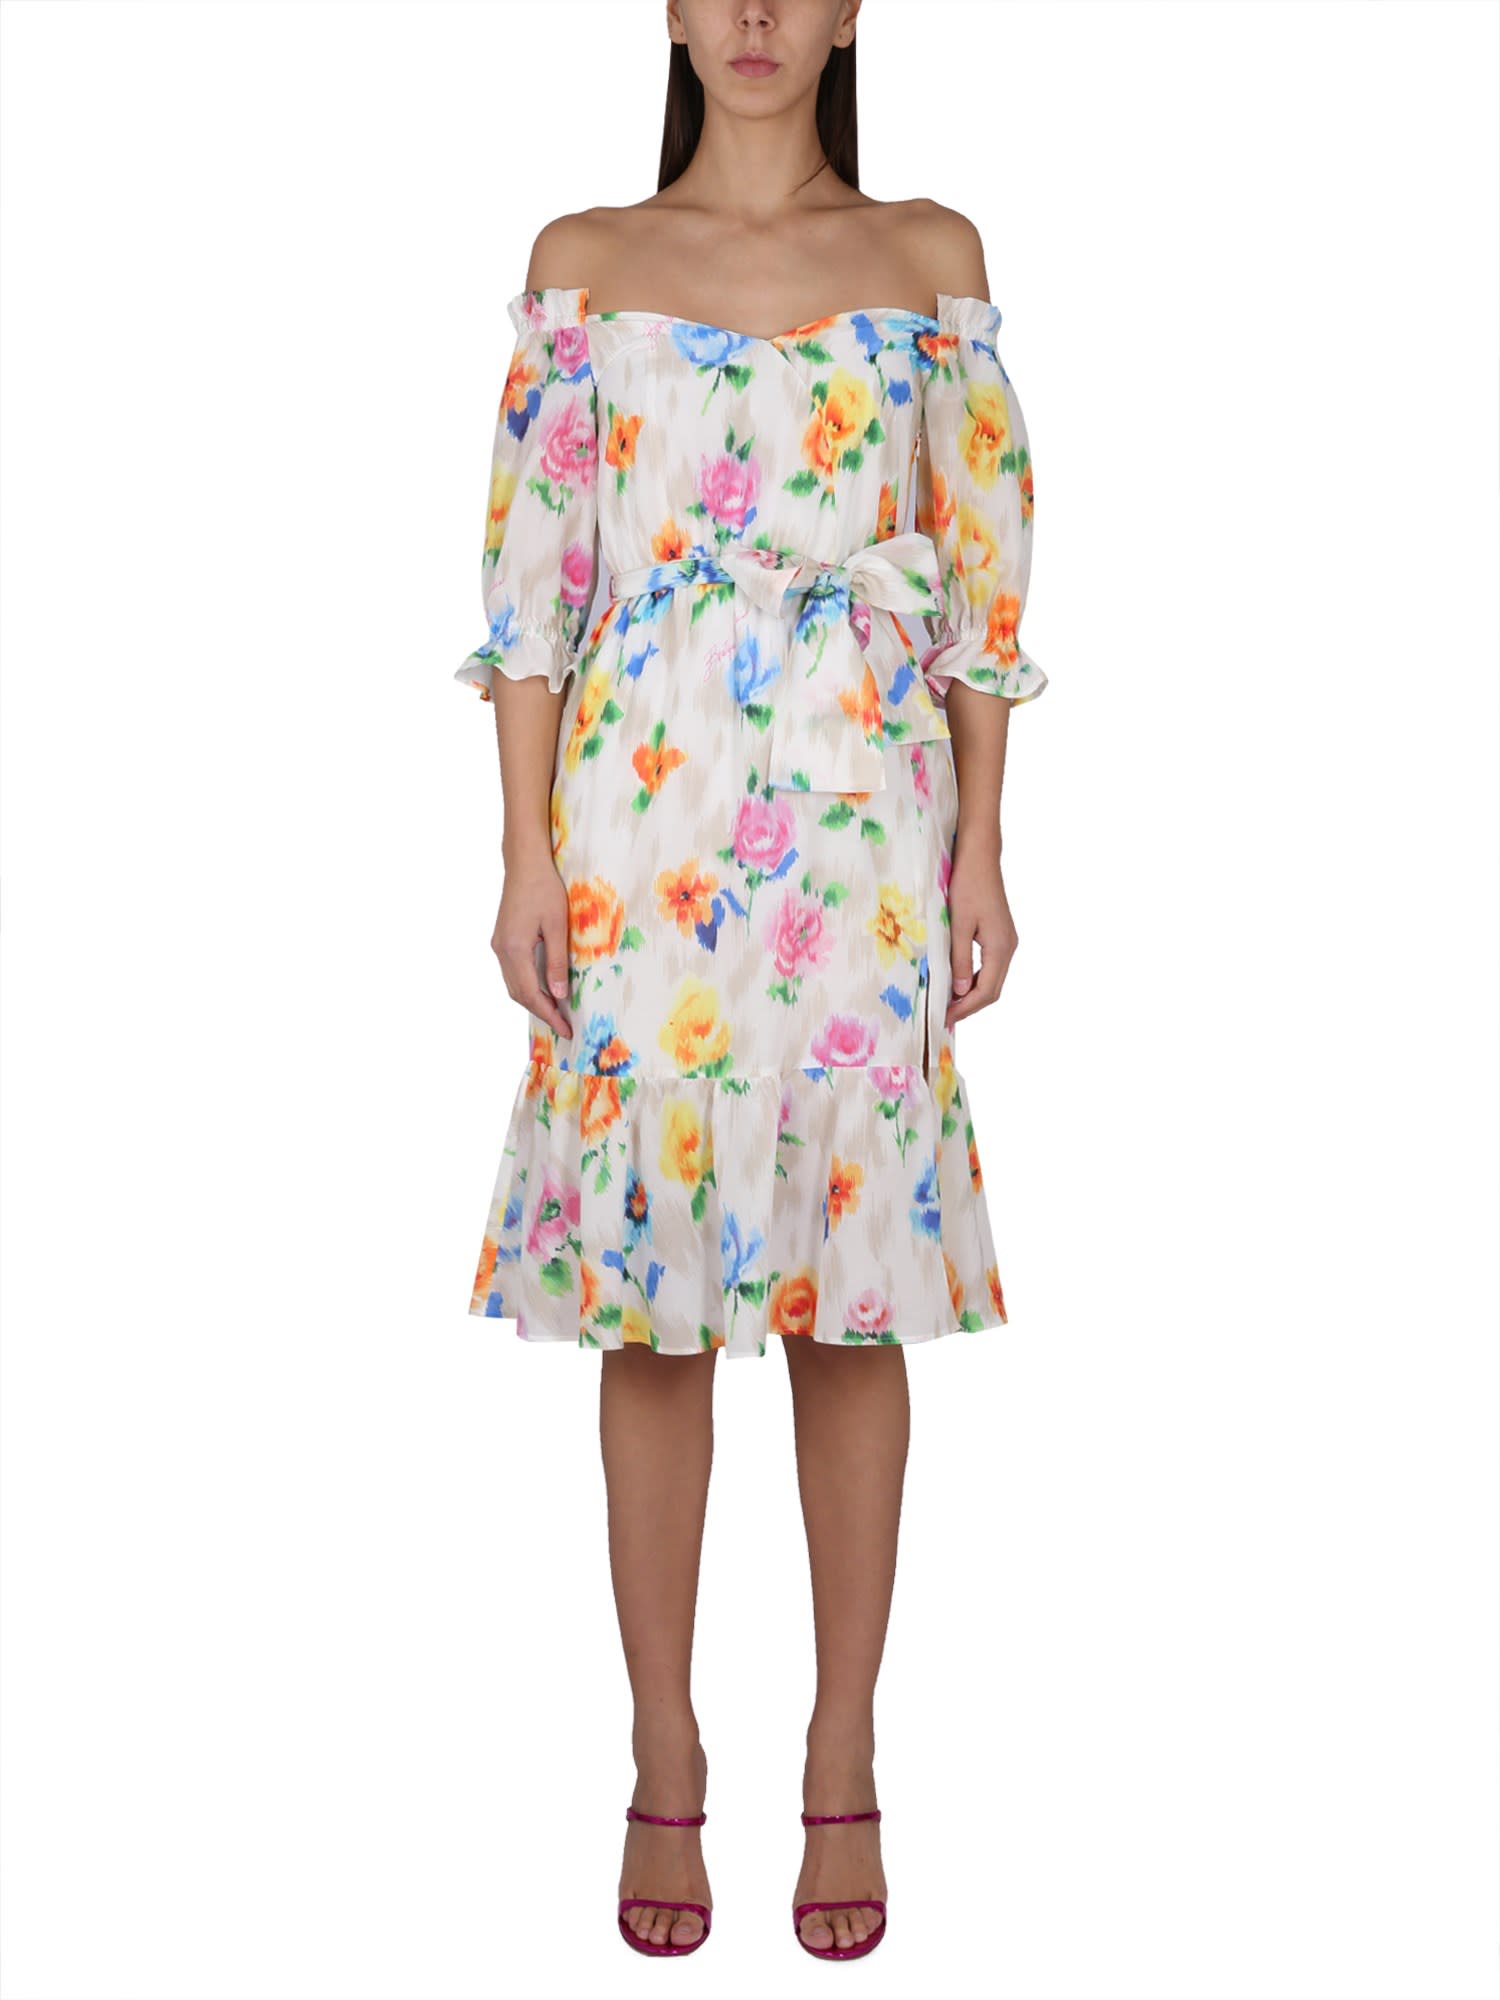 BOUTIQUE MOSCHINO DRESS WITH FLORAL PATTERN